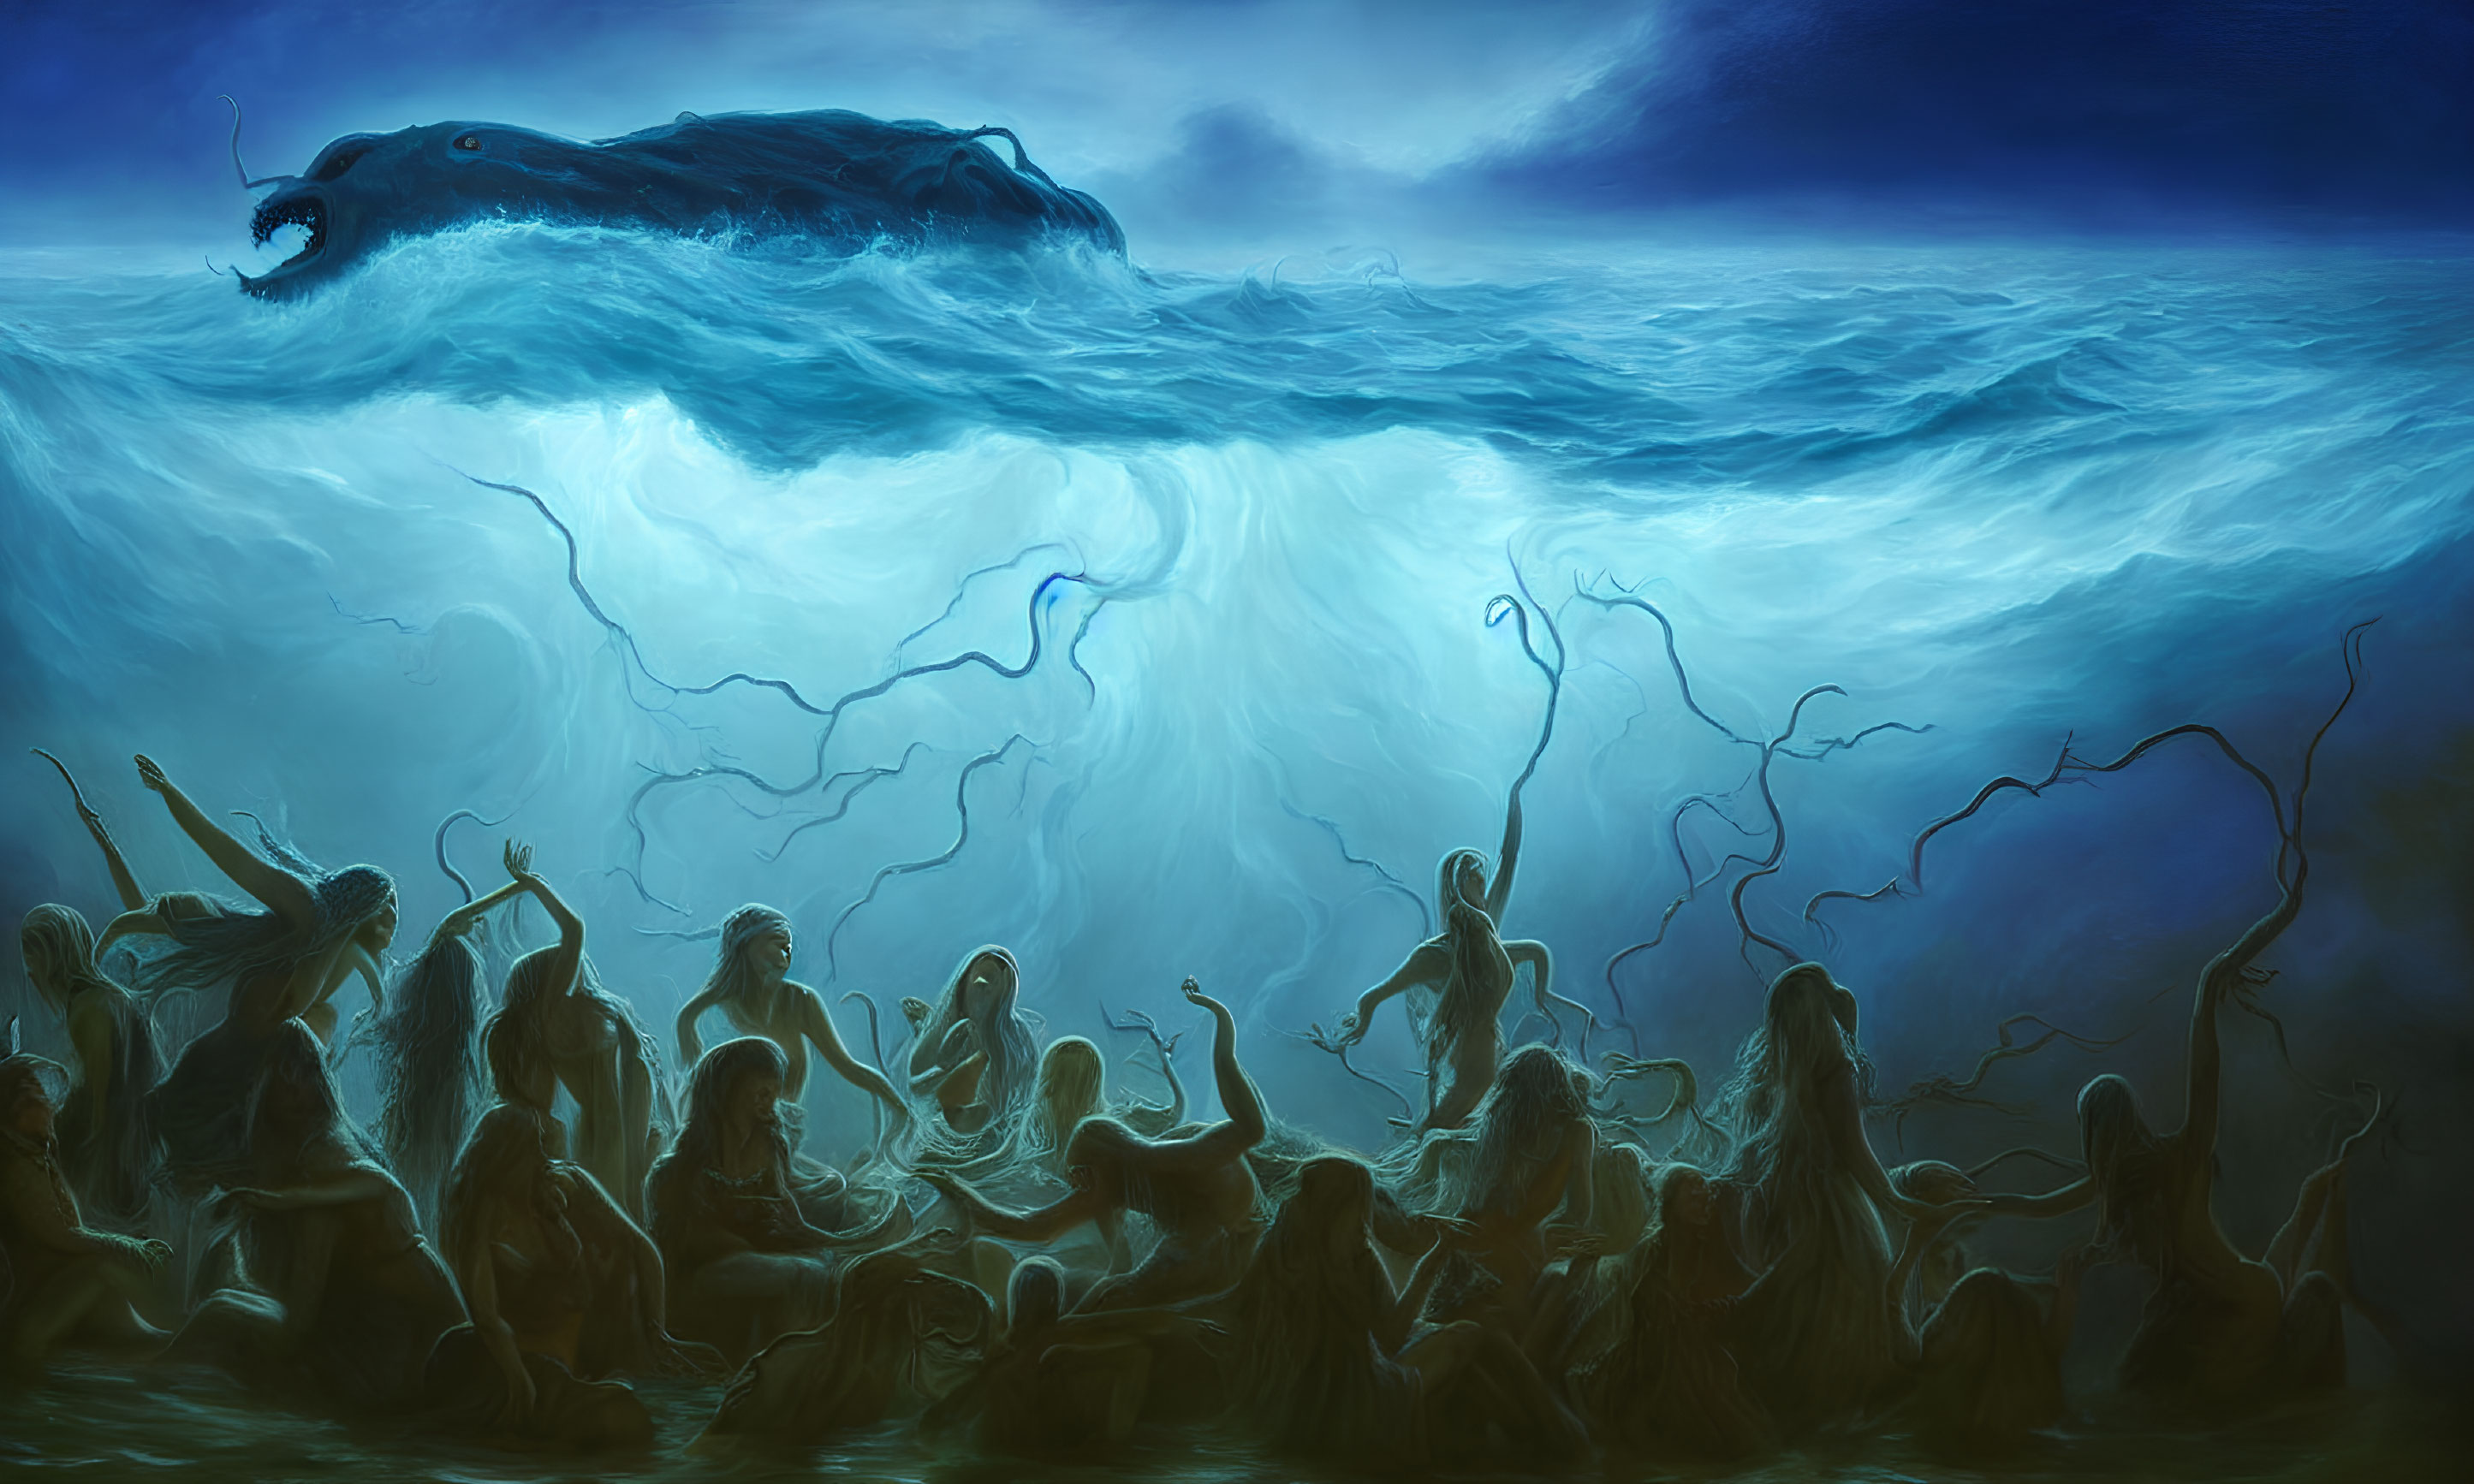 Digital painting of people in turbulent sea with spectral tentacles & monstrous creature.